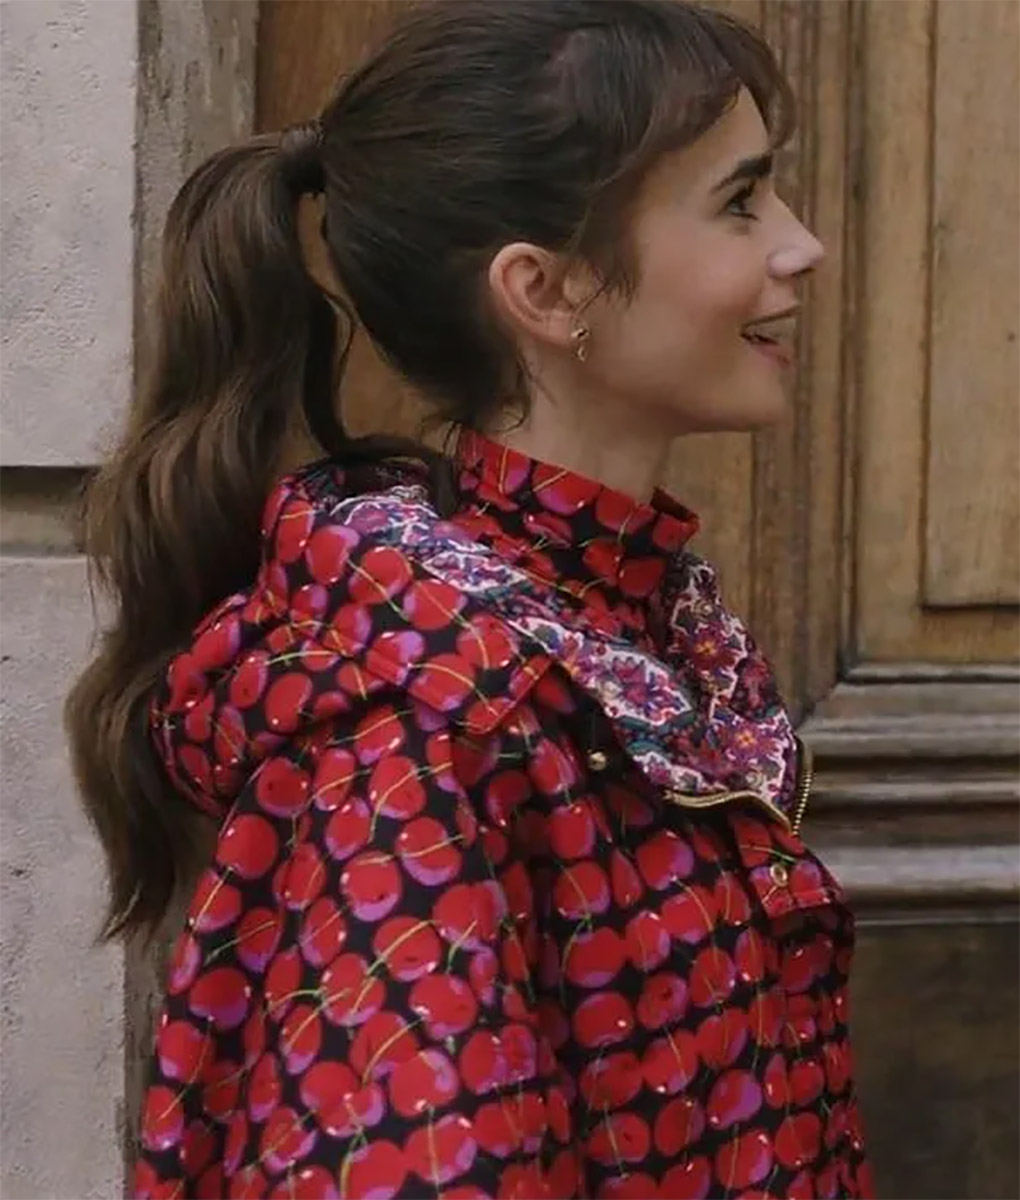 Emily In Paris S03 Lily Collins Red Cherries Jacket